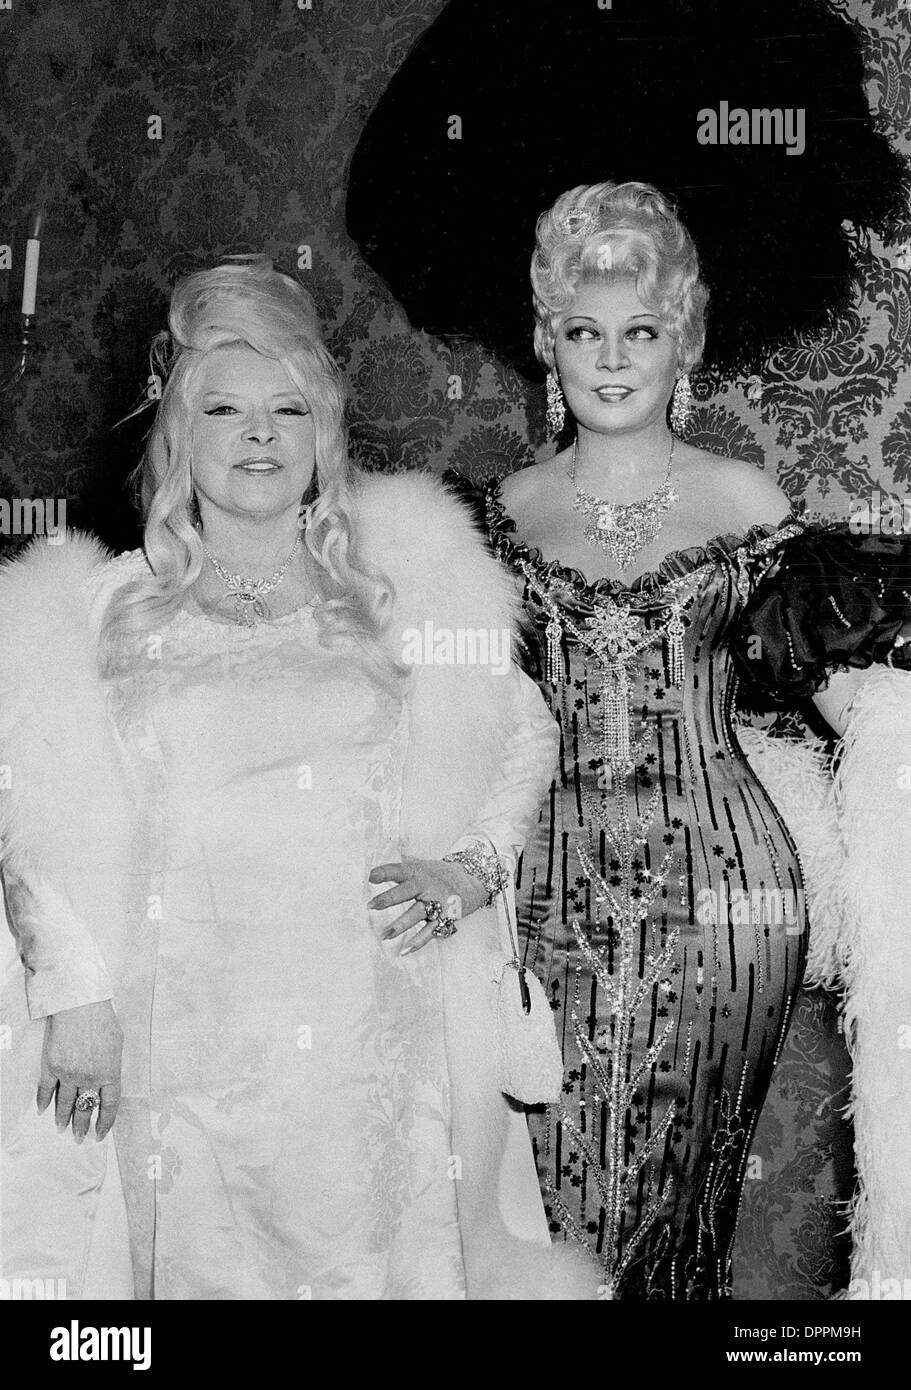 July 17, 2006 - MAE WEST STANDS IN FRONT OF WAX FIGURE OF HERSELF AS SHE WAS IN ''SHE DONE HIM WRONG'' DURING CEREMONIES AT MOVIELAND WAX MUSEUM. DEREK-(Credit Image: © Globe Photos/ZUMAPRESS.com) Stock Photo